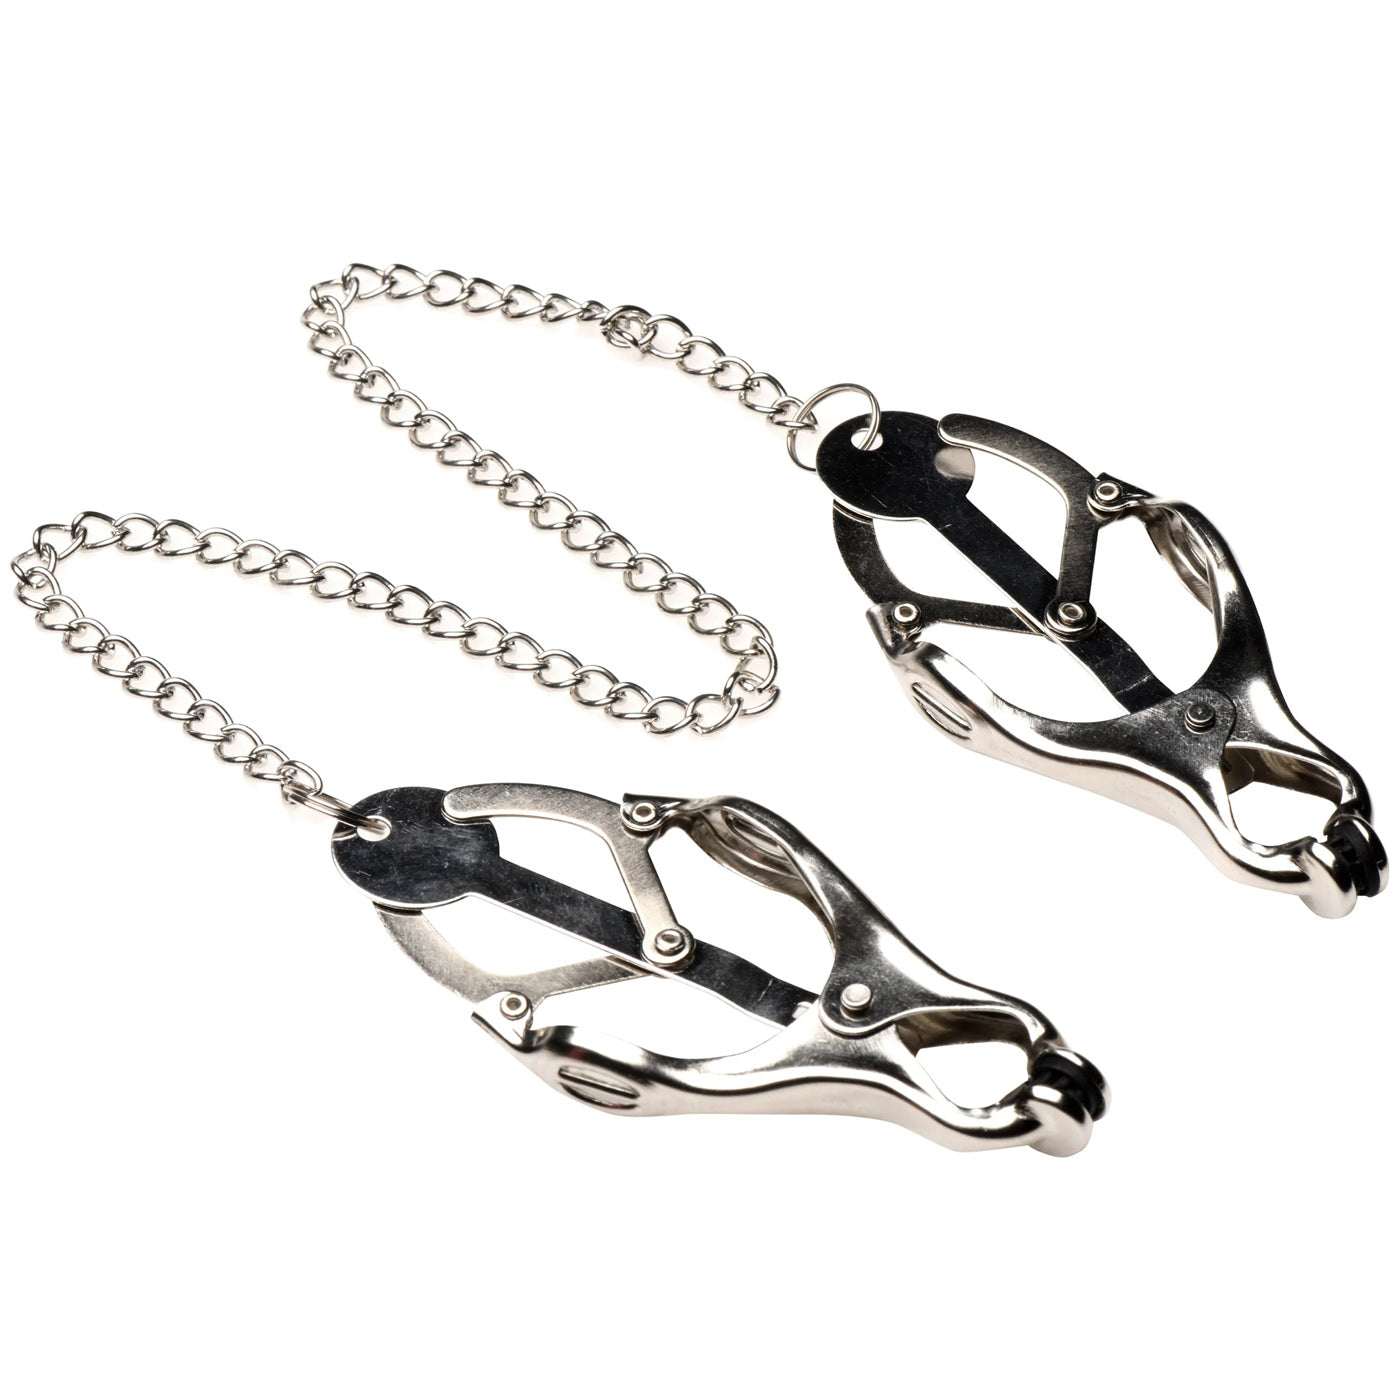 Primal Spiked Clover Nipple Clamps - Silver MS-AH351